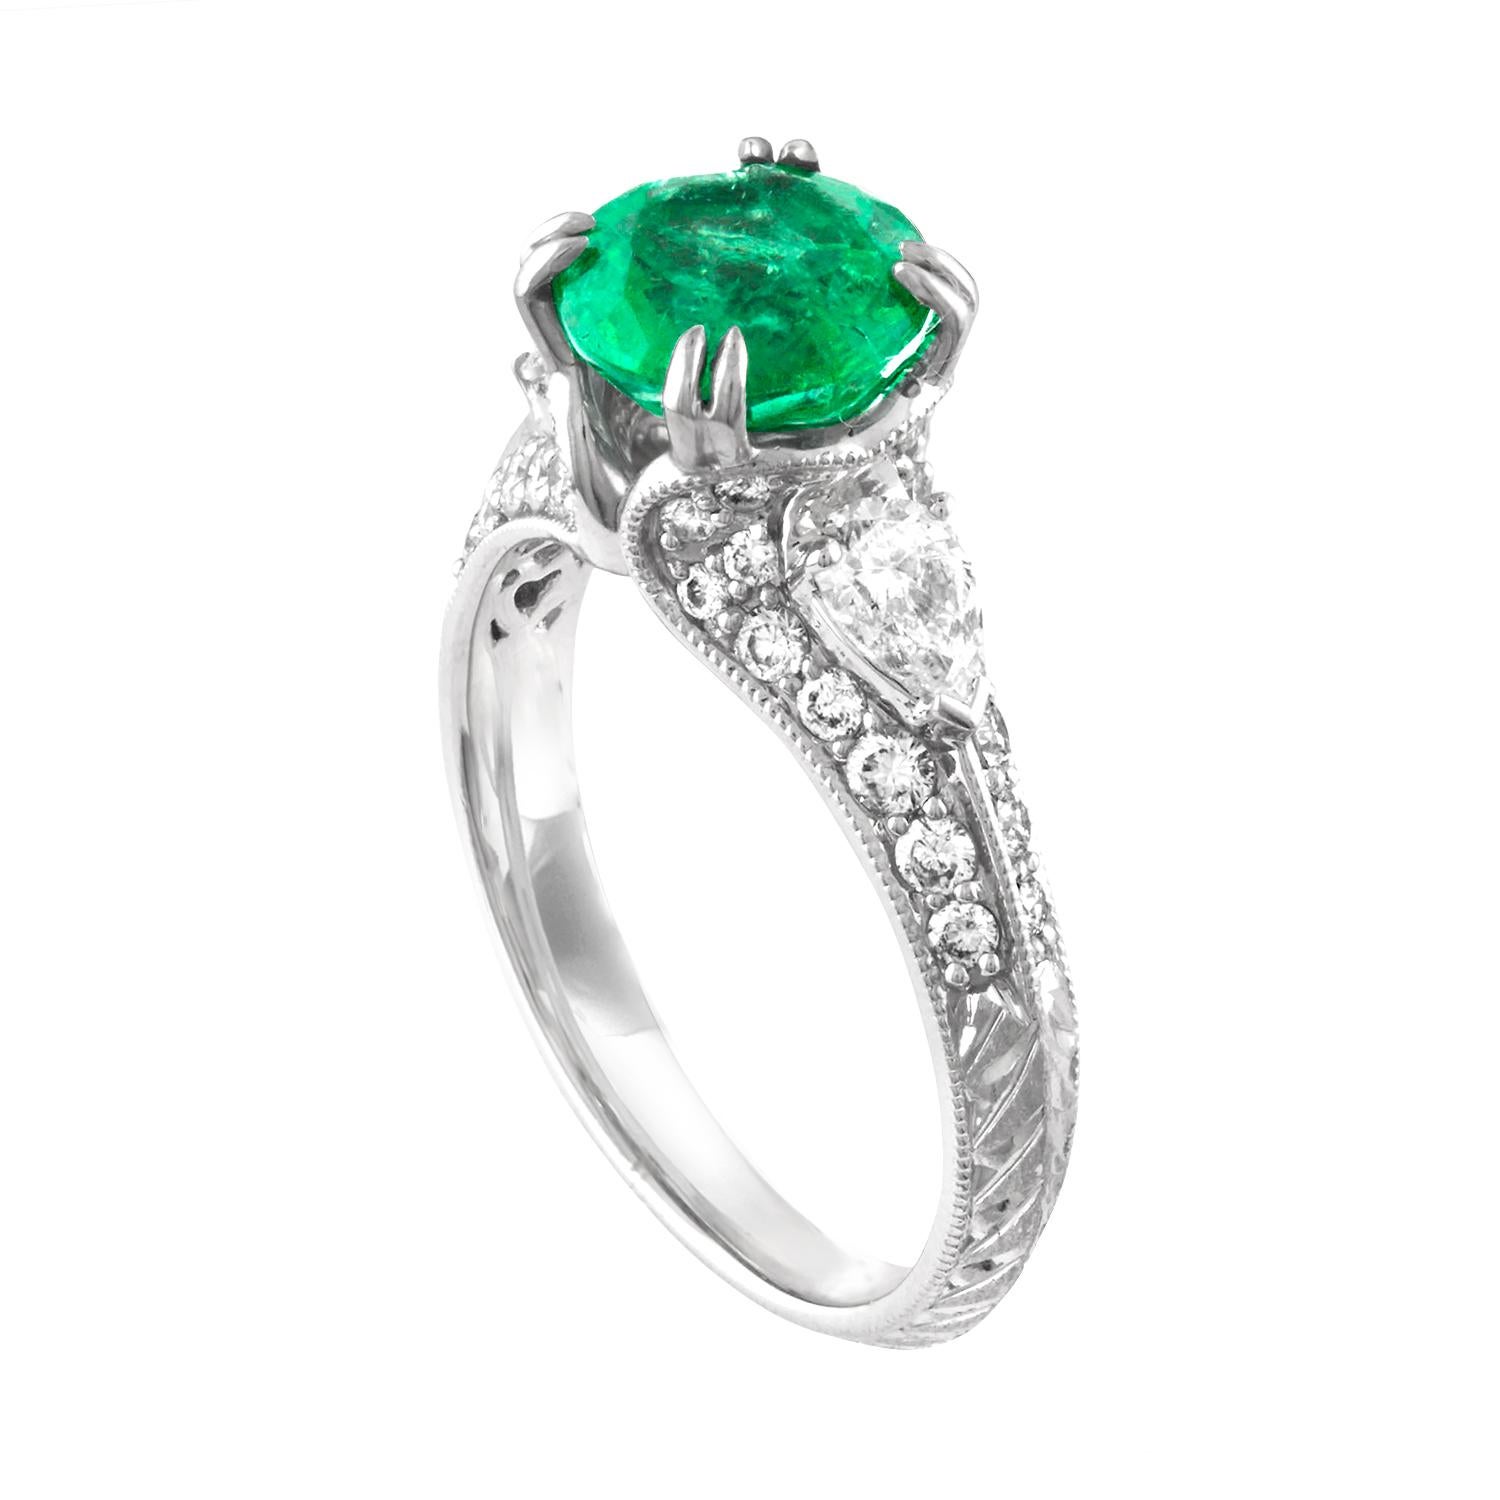 Beautifully Milgrain and Diamond Cut Filigree Emerald Ring
The ring is 18K White Gold
The Center Stone is 1.78 Carats Round Emerald
The Emerald is Zambian GIA Certified Oil Treated
There are 0.90 Carats In Diamonds F/G VS/SI
The ring is a size 7,